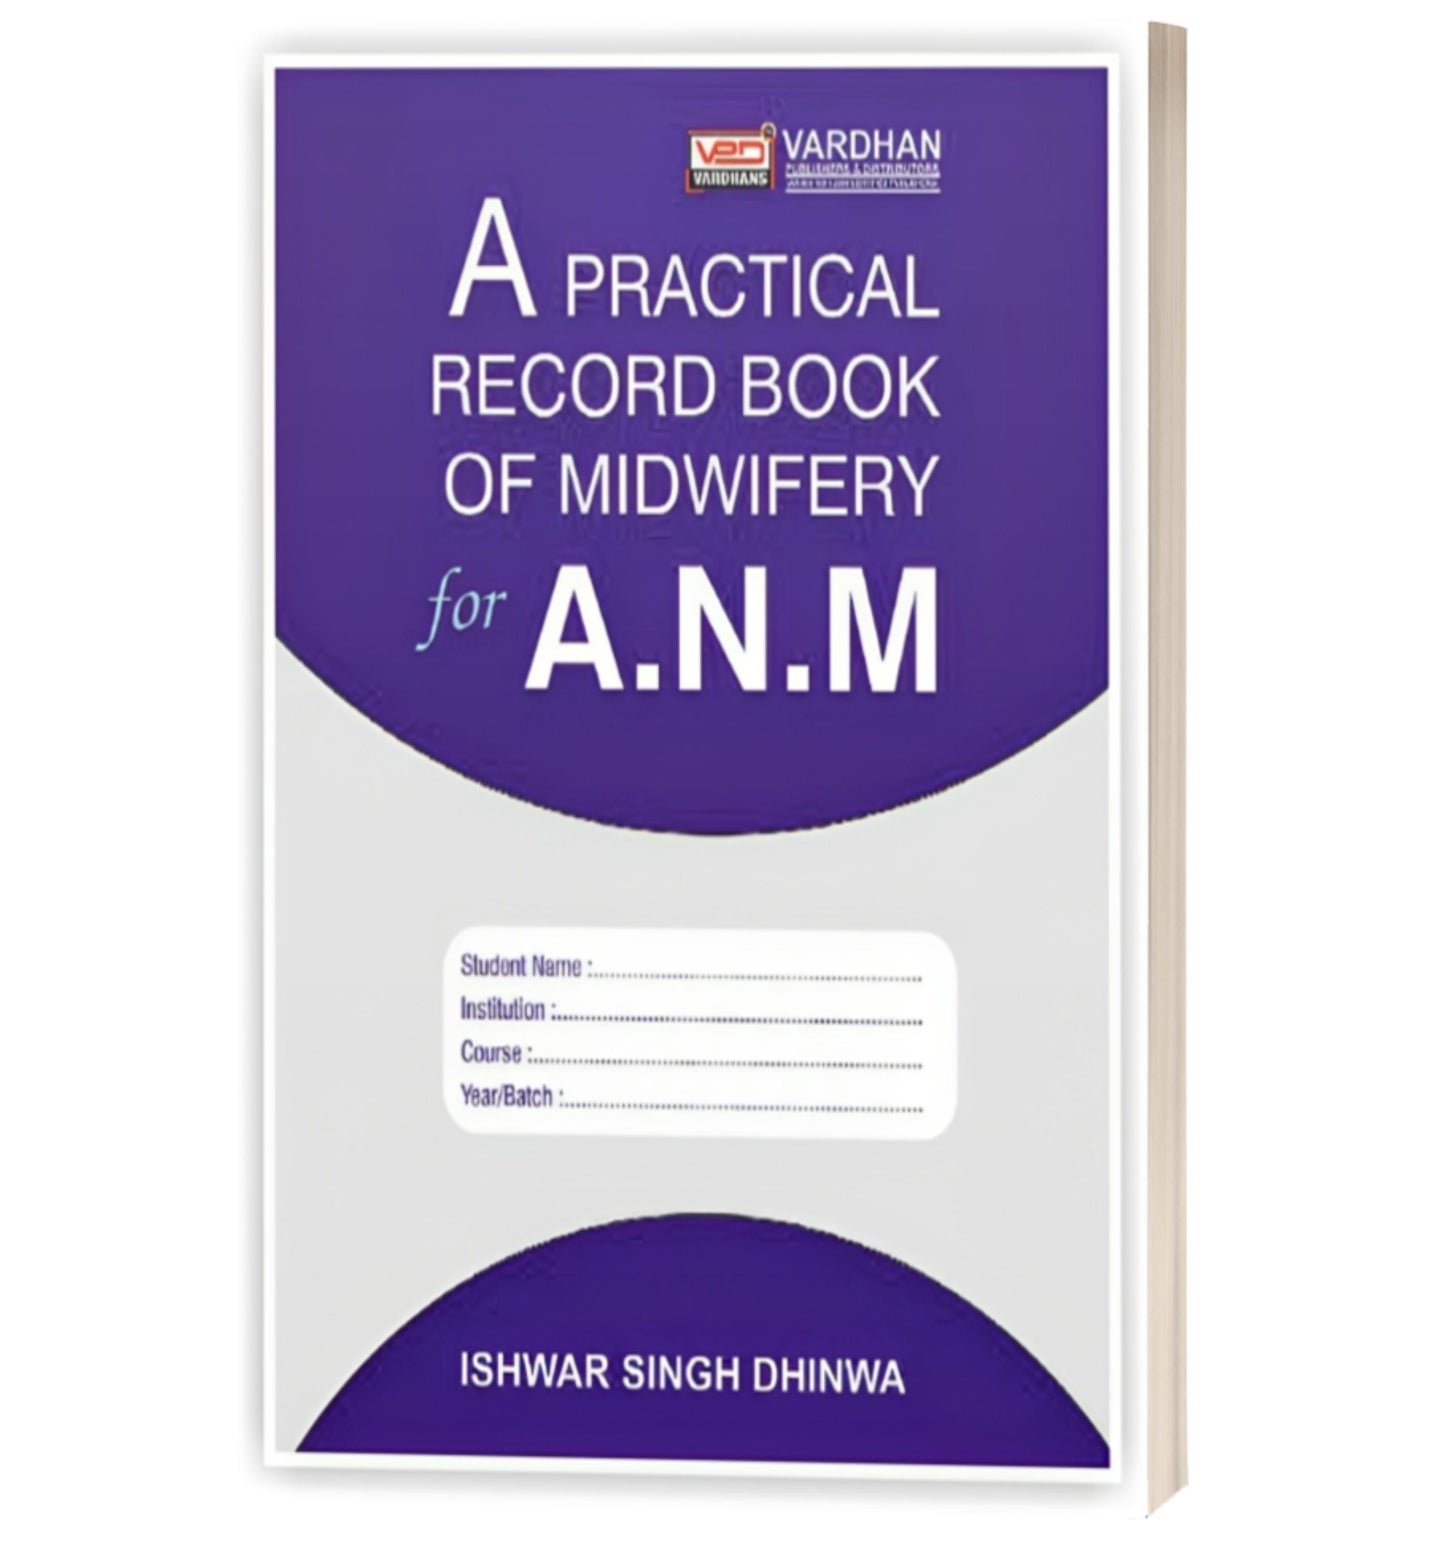 A Practical Record Book of Midwifery for ANM